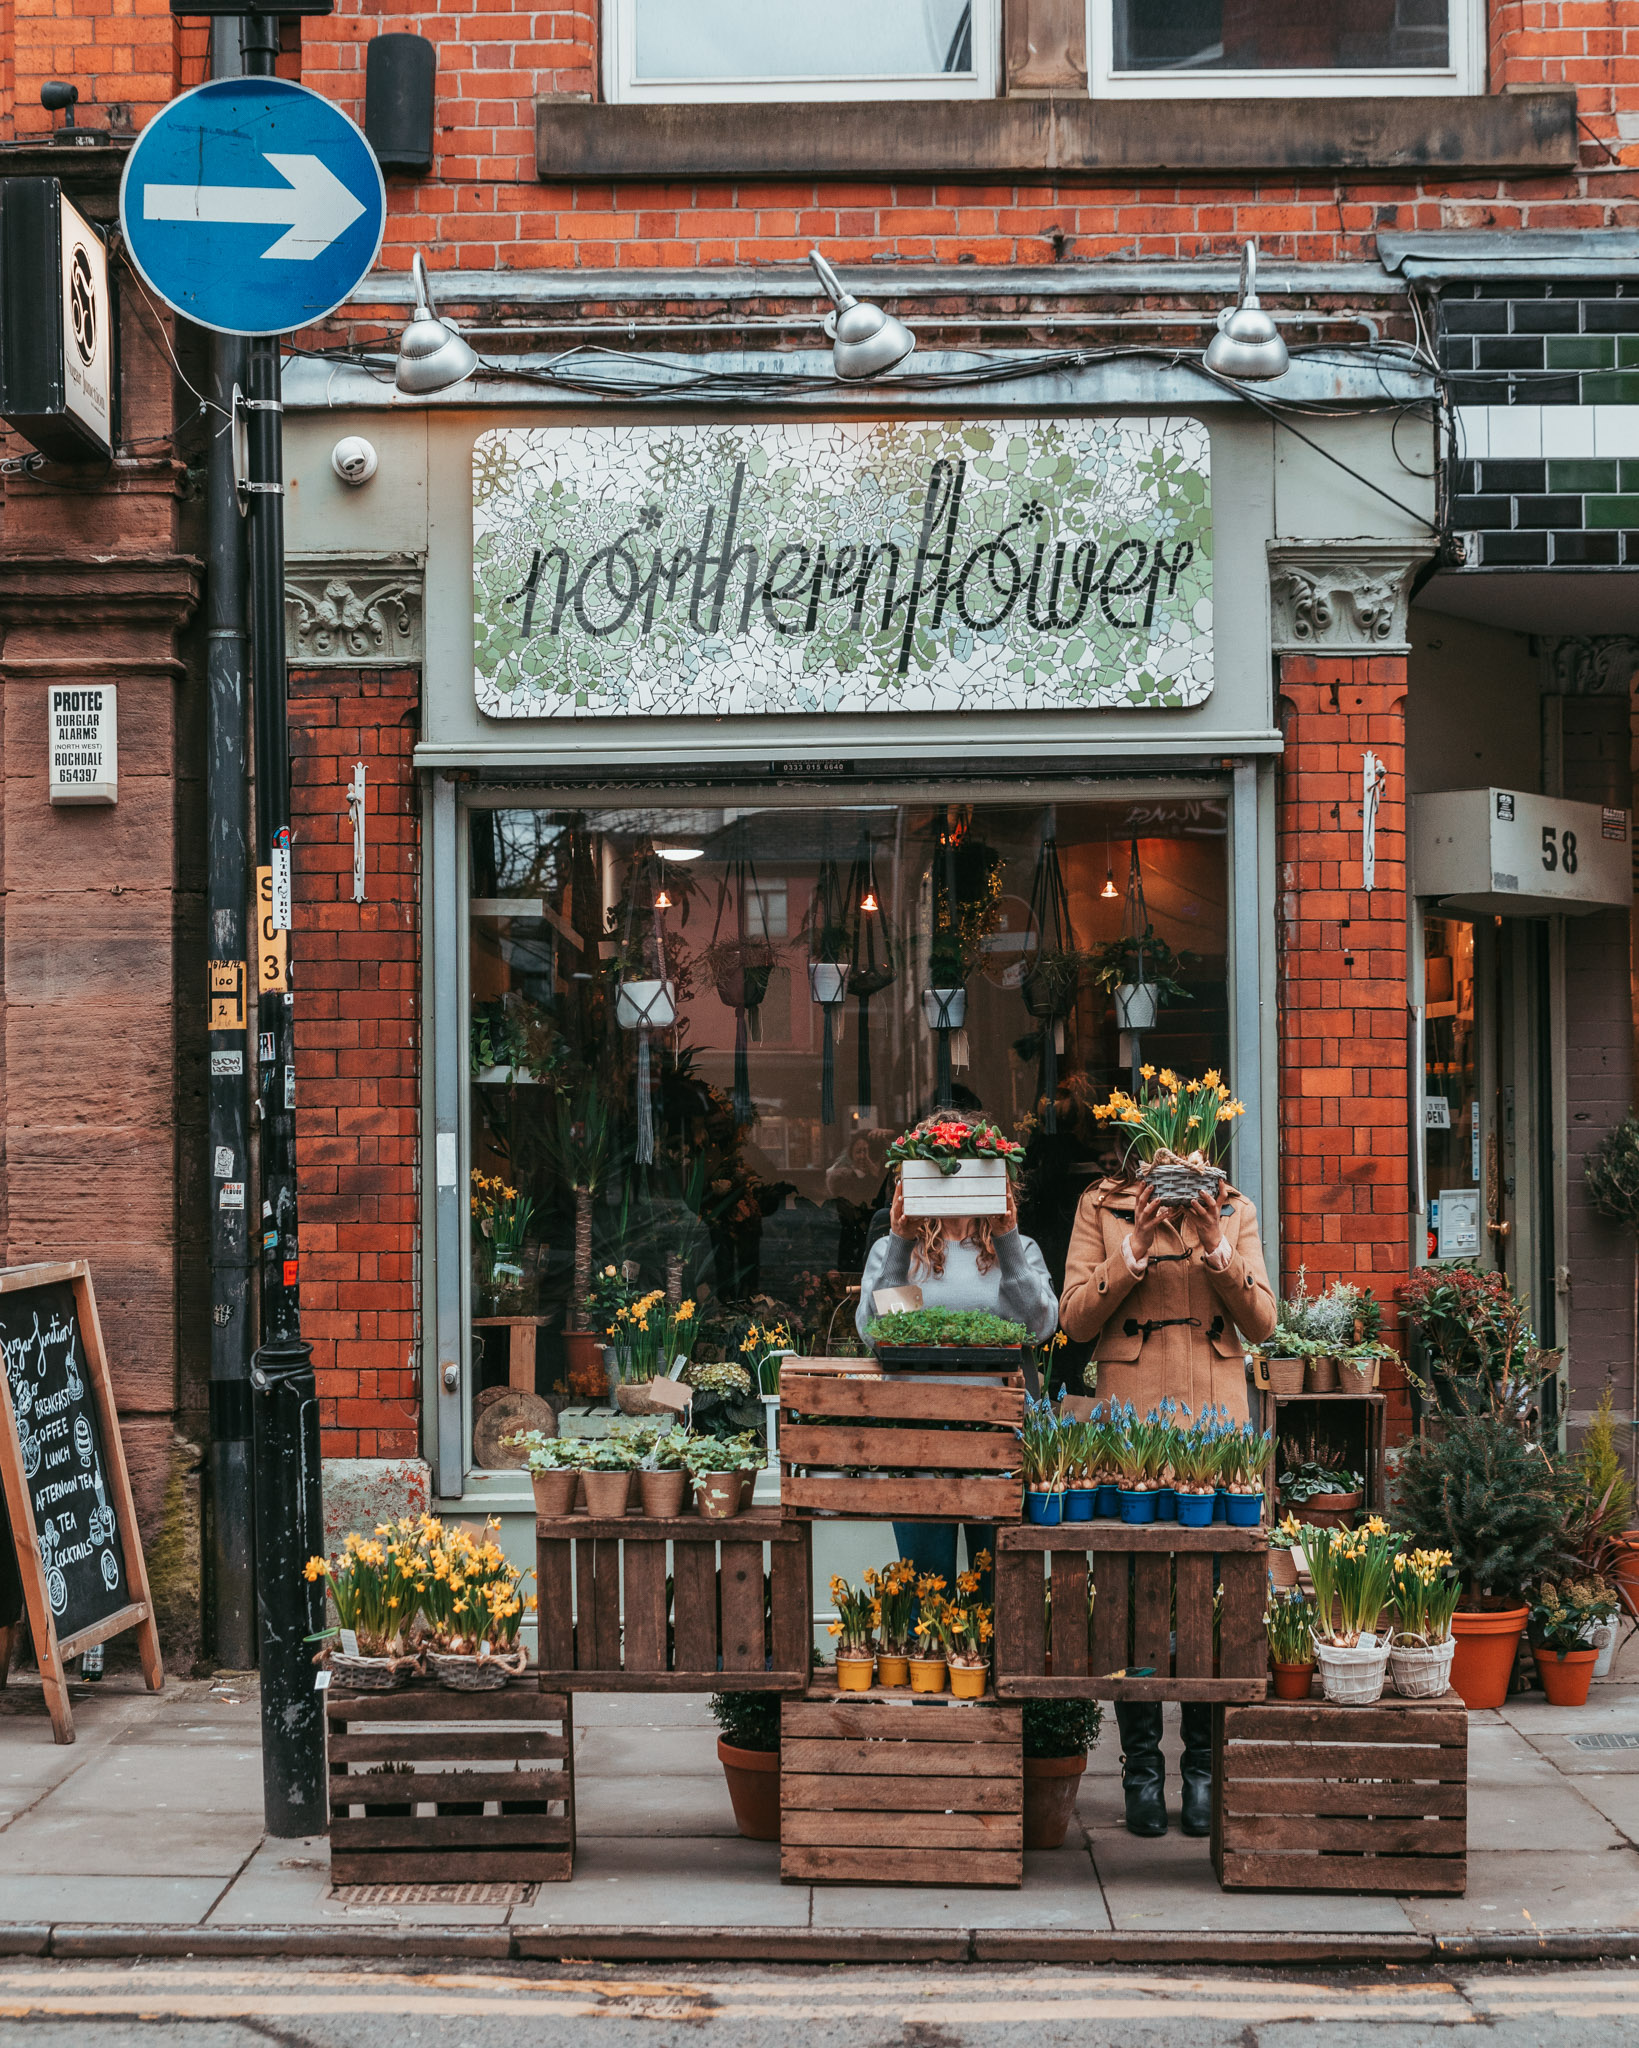 Northern Flower, a flower shop in the Northern Quarter of Manchester // 11 INSTAGRAM-WORTHY PHOTO SPOTS IN MANCHESTER, ENGLAND // www.readysetjetset.net #readysetjetset #manchester #england #uk #unitedkingdom #cityguide #travel